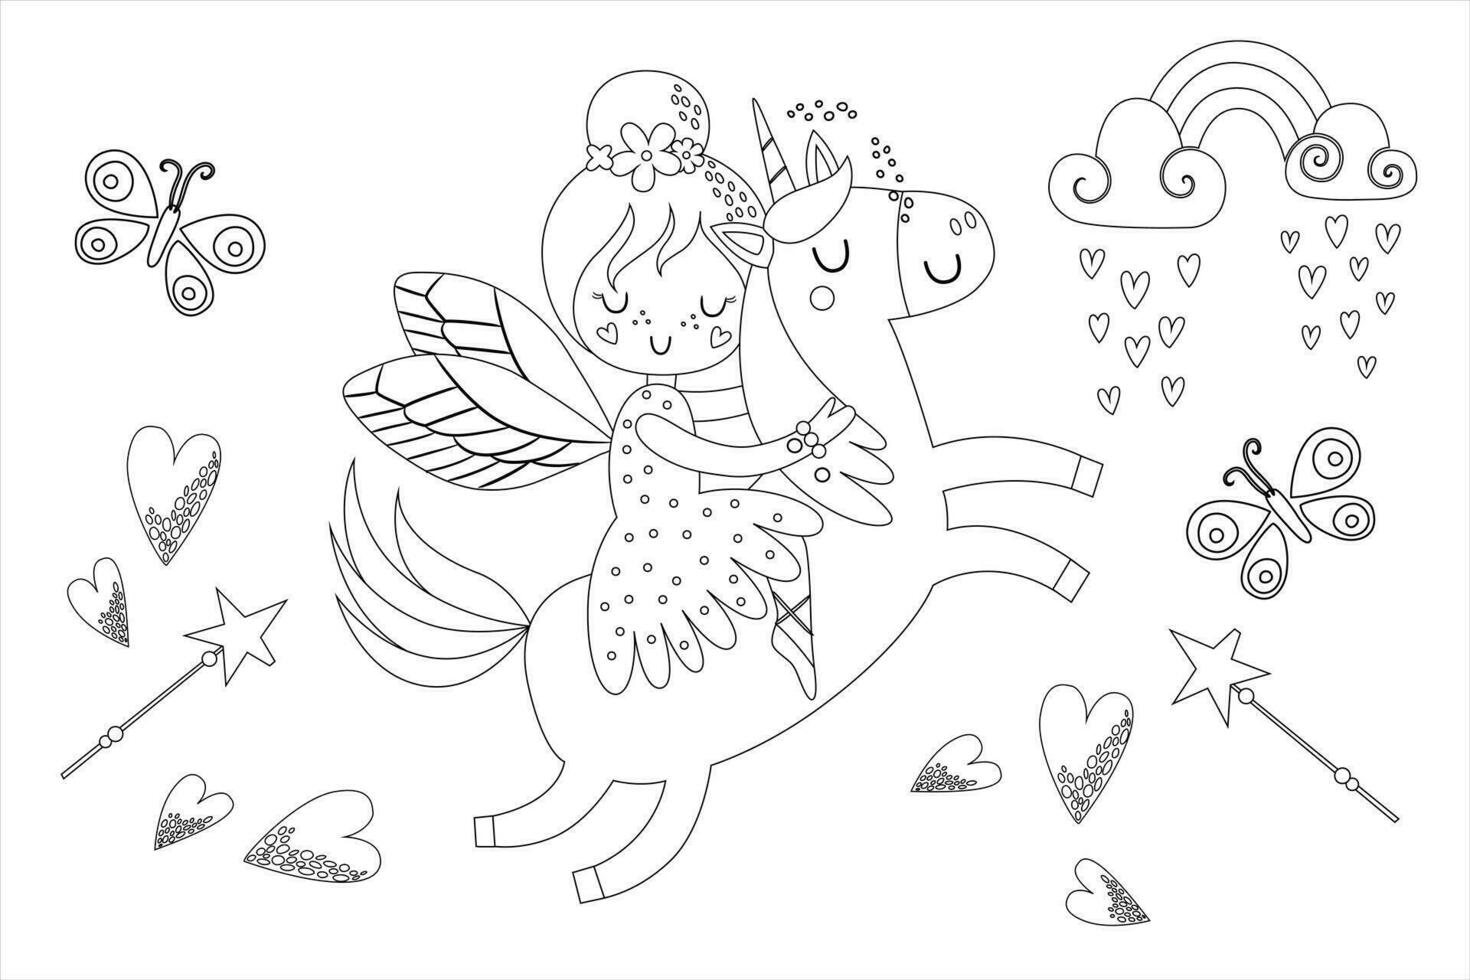 Cute princess fairy with a Unicorn Vector cartoon isolated fairytales illustration. Coloring book page for children with colorful template